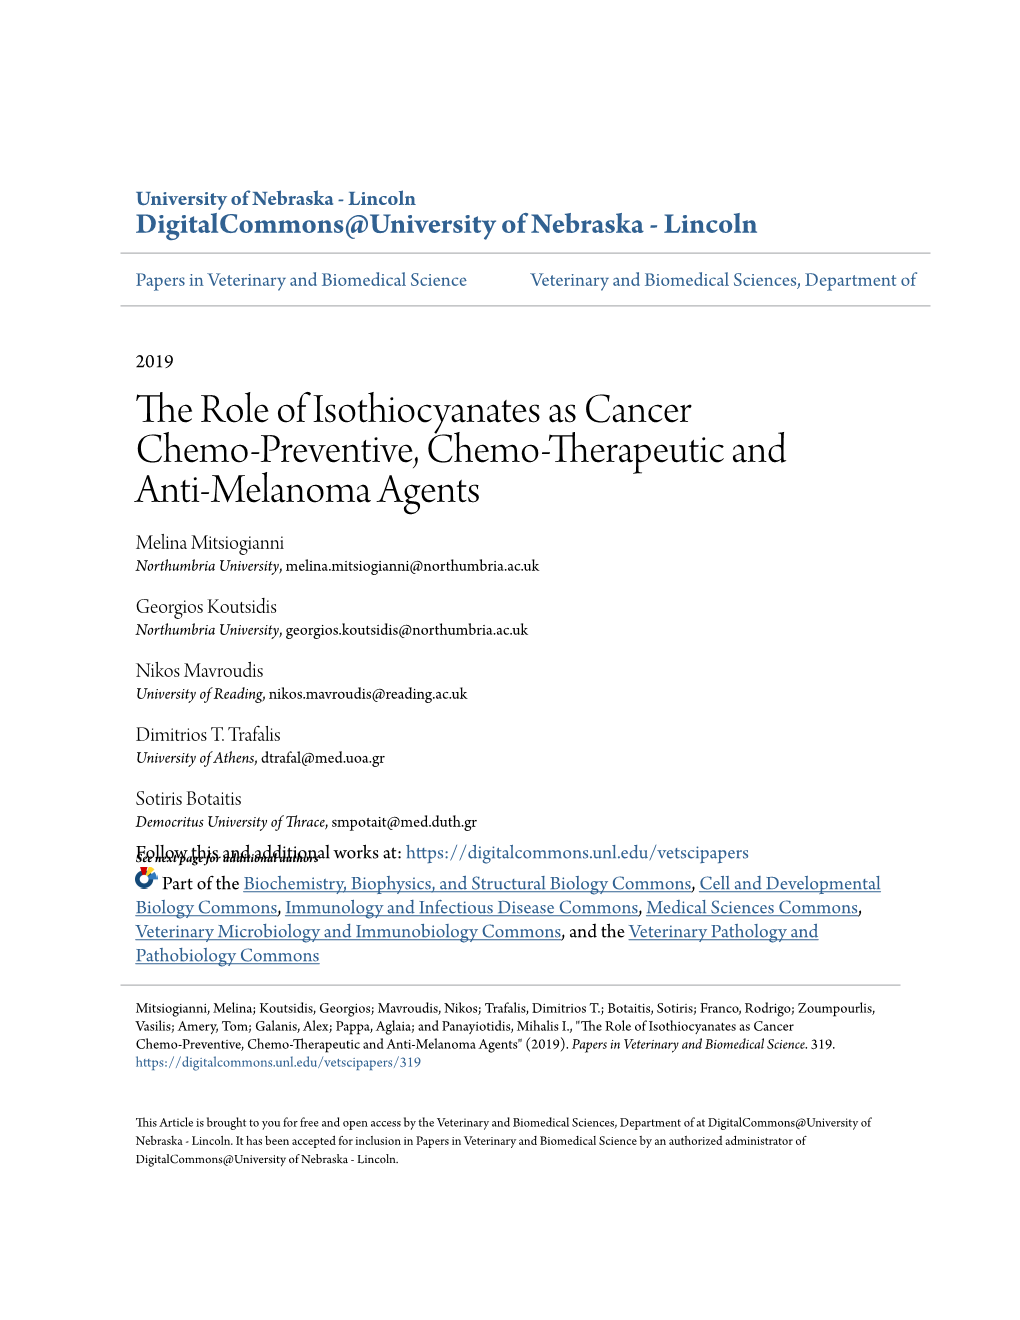 The Role of Isothiocyanates As Cancer Chemo‐Preventive, Chemo